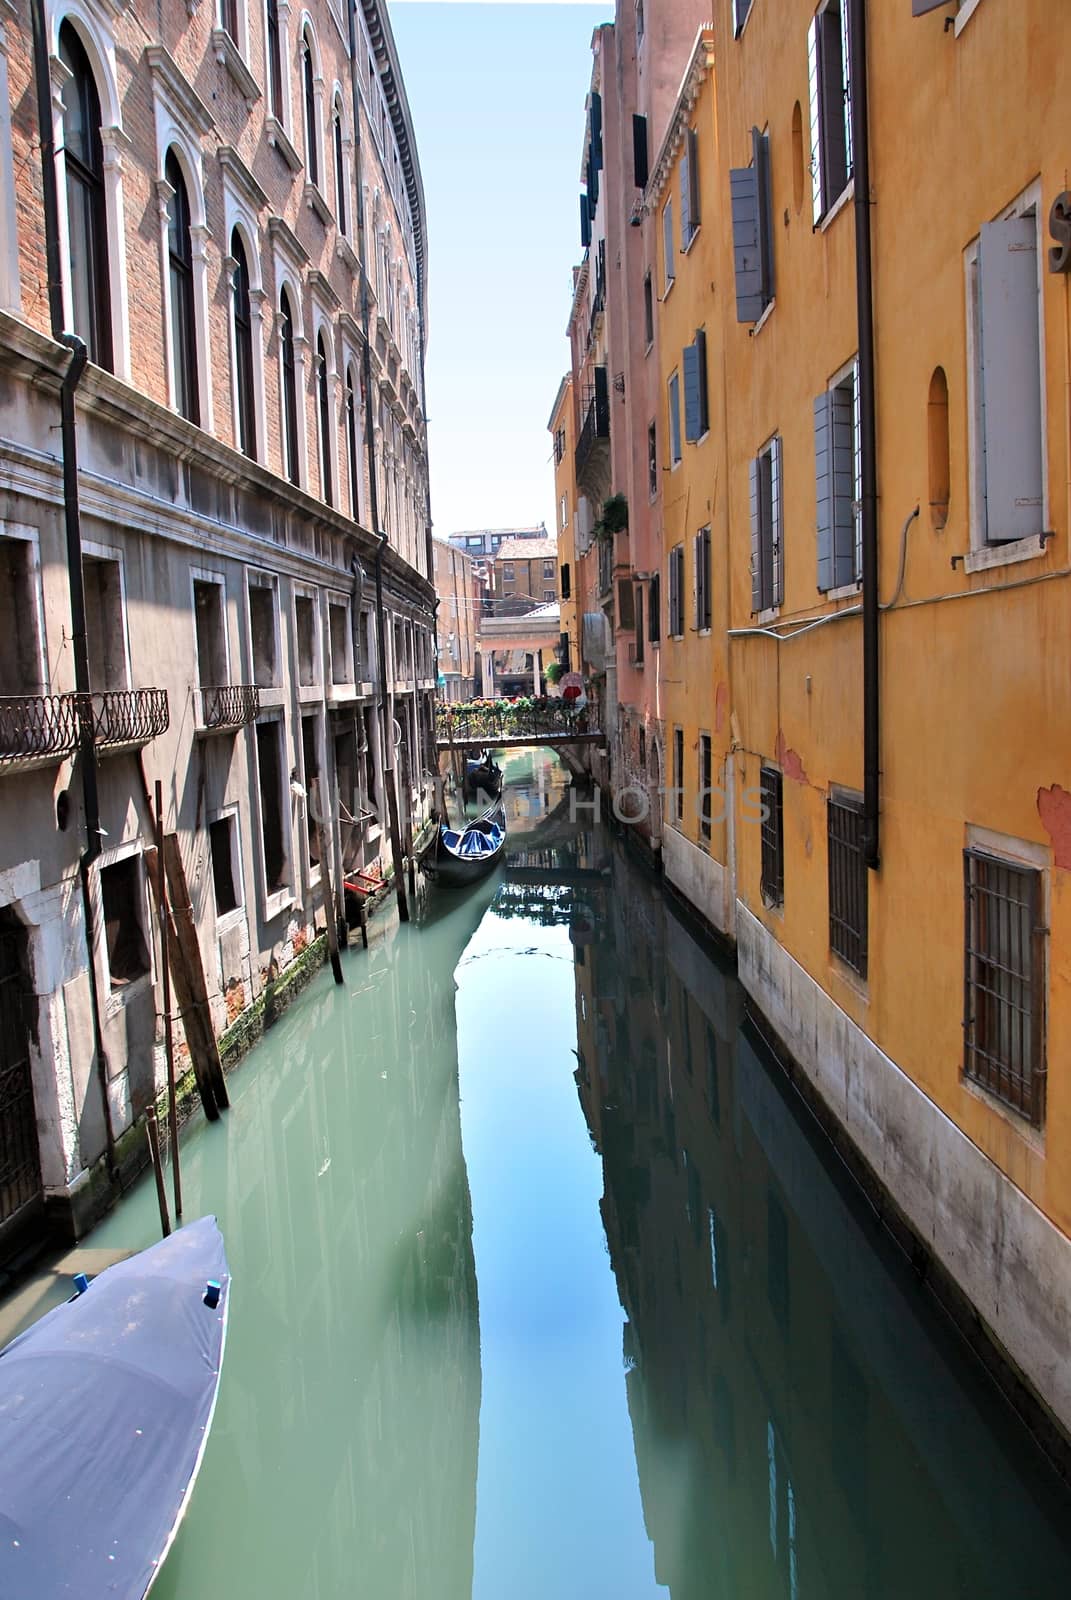 Main canal in Venice. by hamik